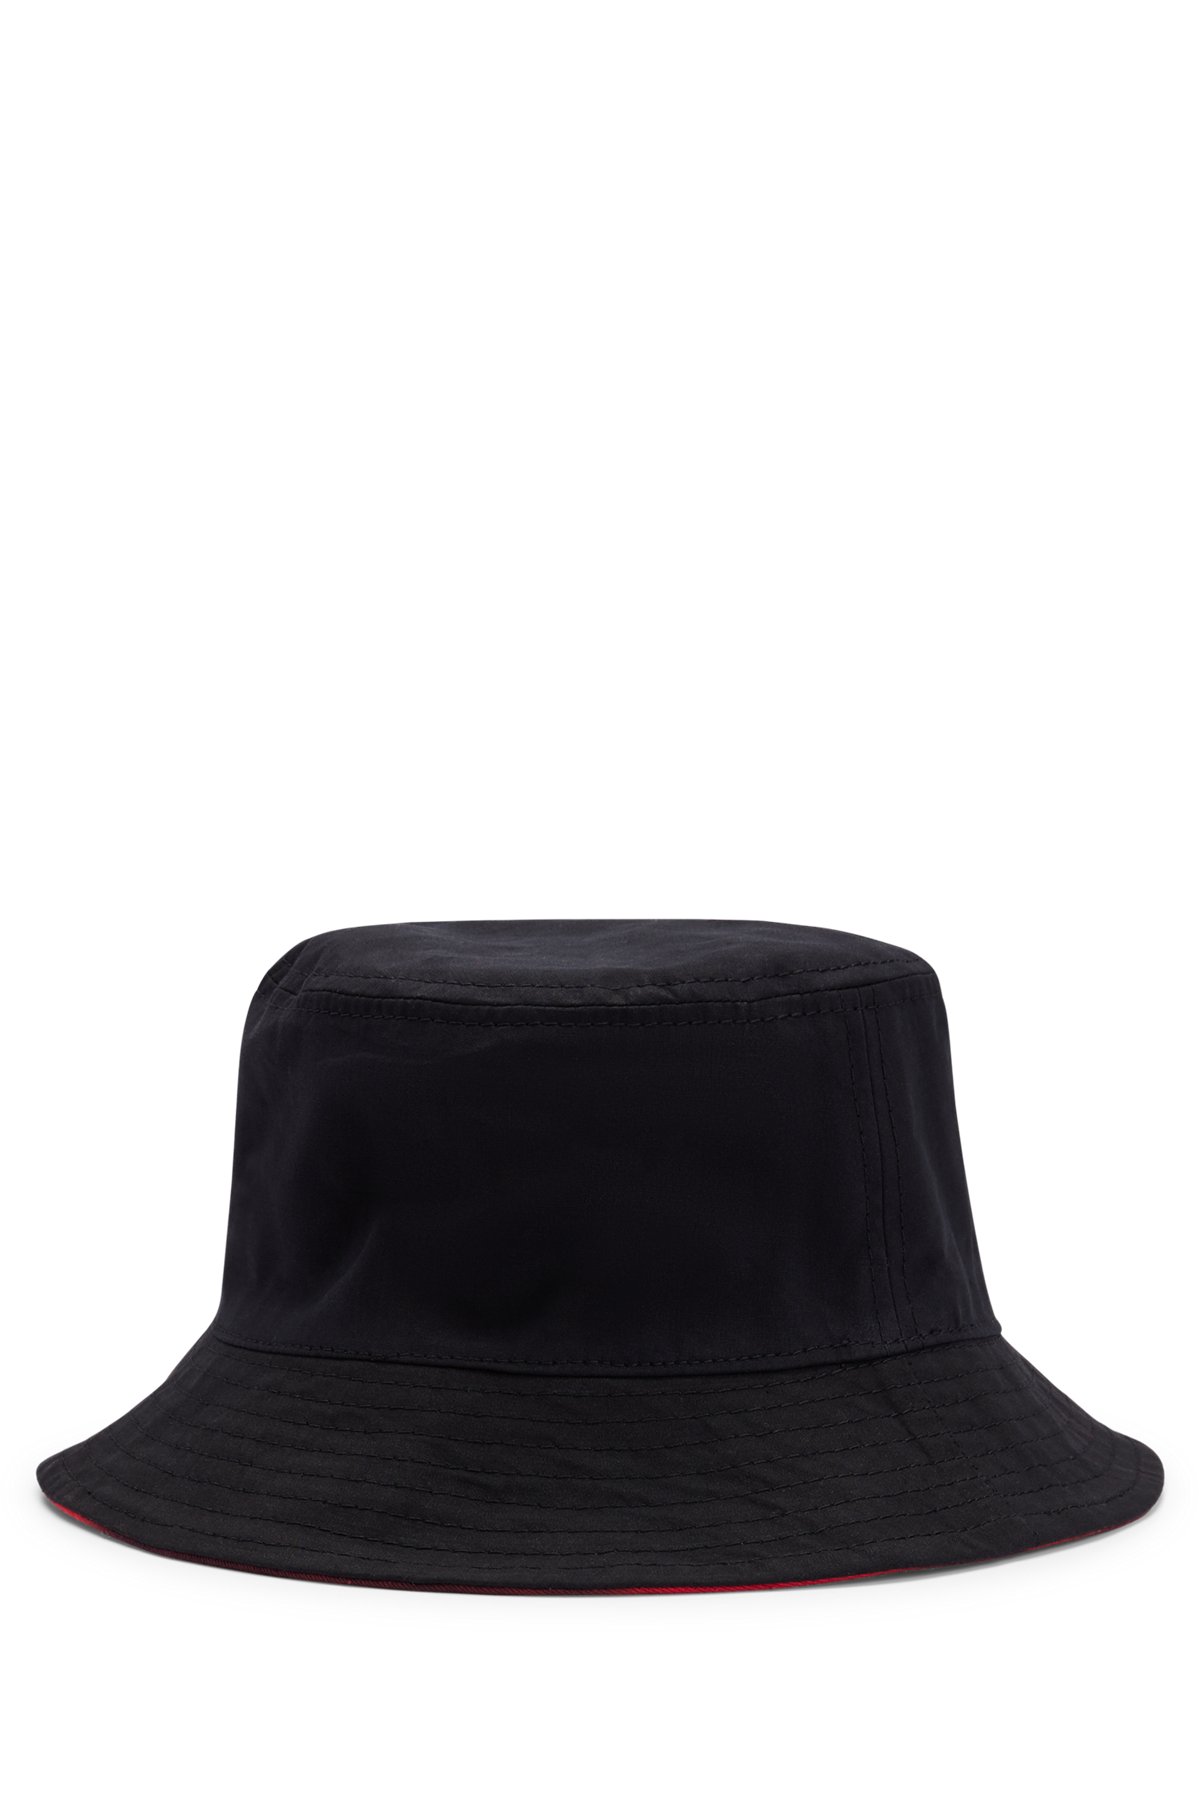 Cotton-twill bucket hat with red logo label, Black